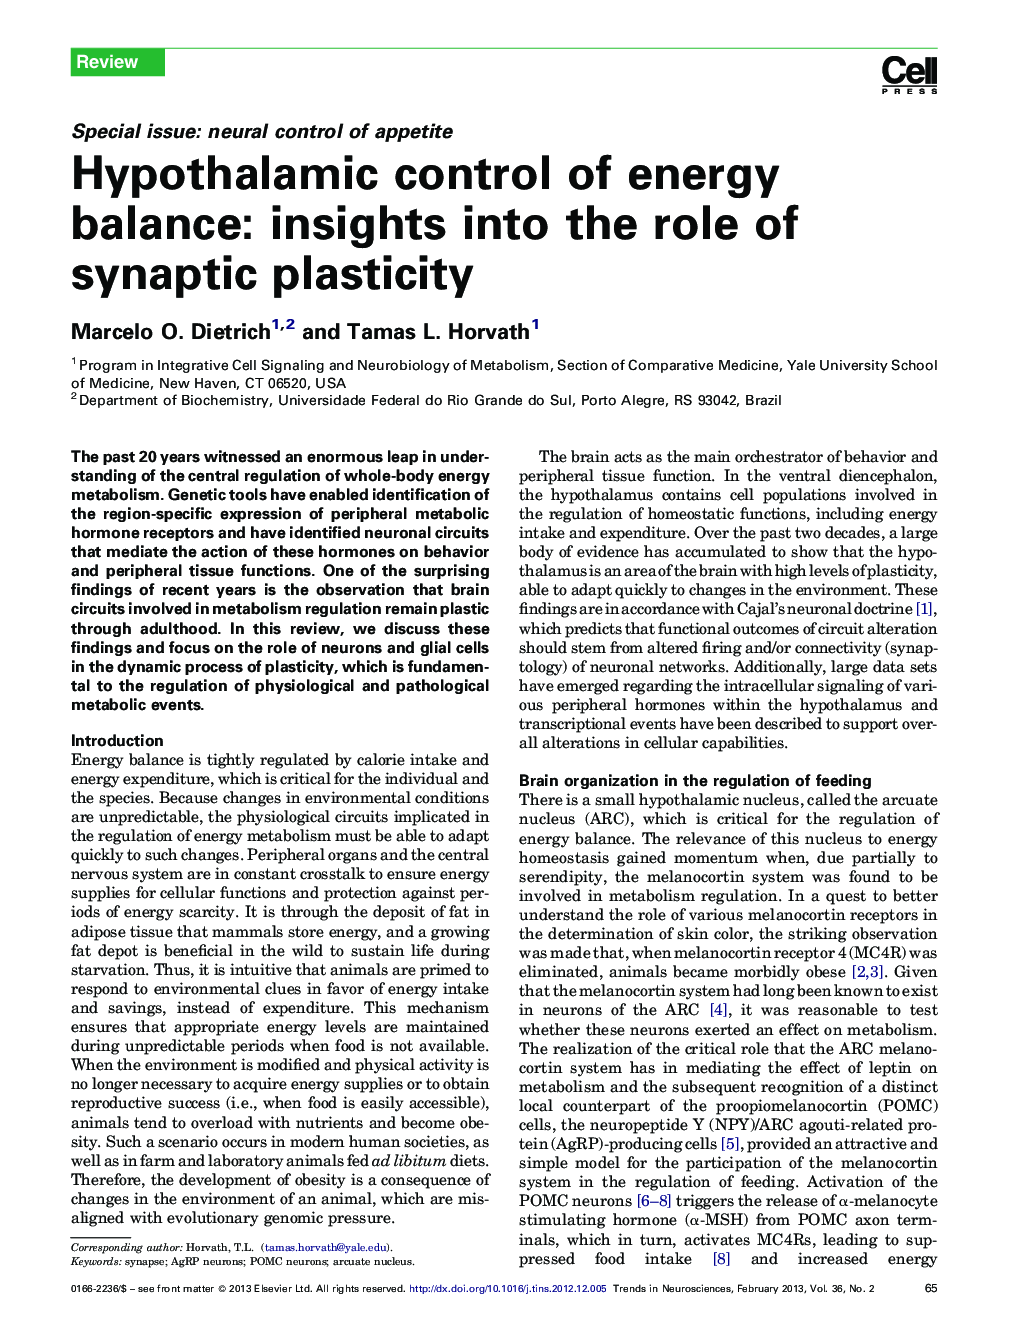 Hypothalamic control of energy balance: insights into the role of synaptic plasticity